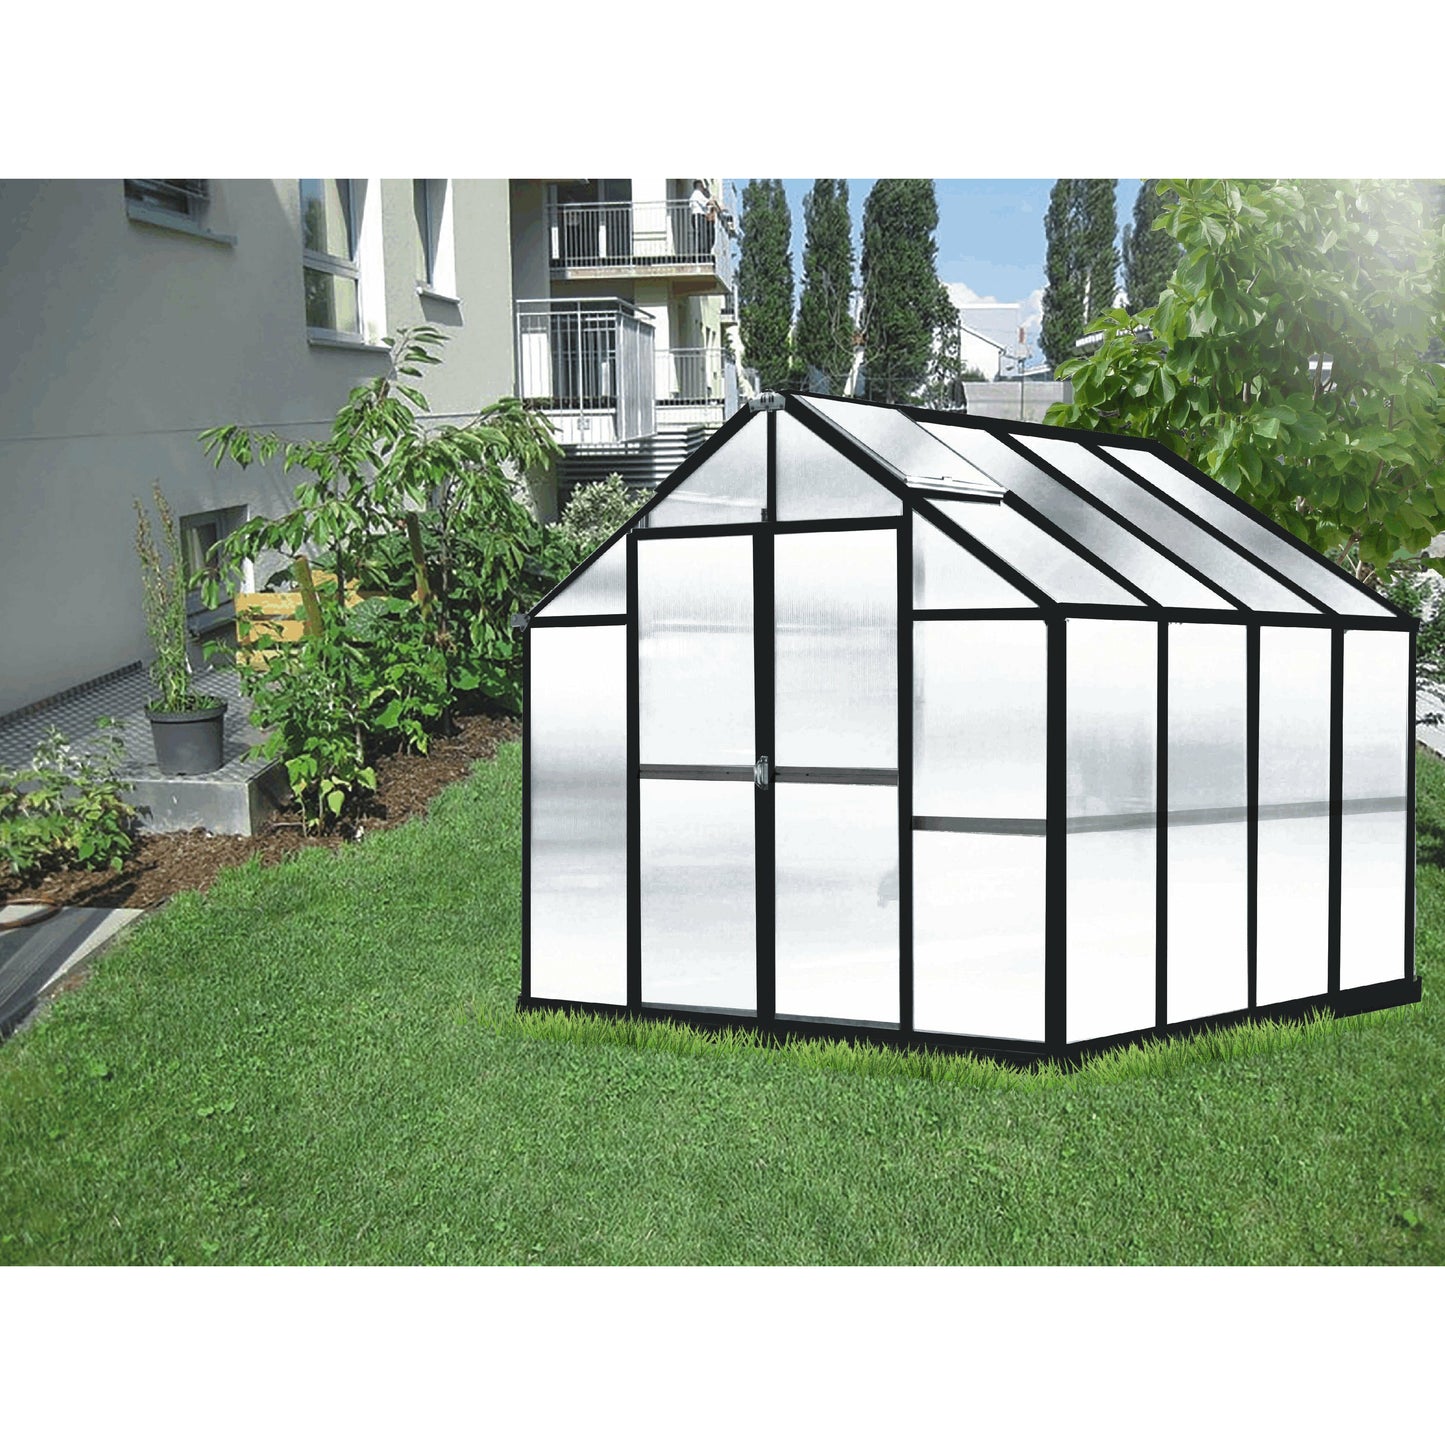 Mont Growers Edition Greenhouse 8FTx 8FT - Black Finish MONT-8-BK-GROWERS